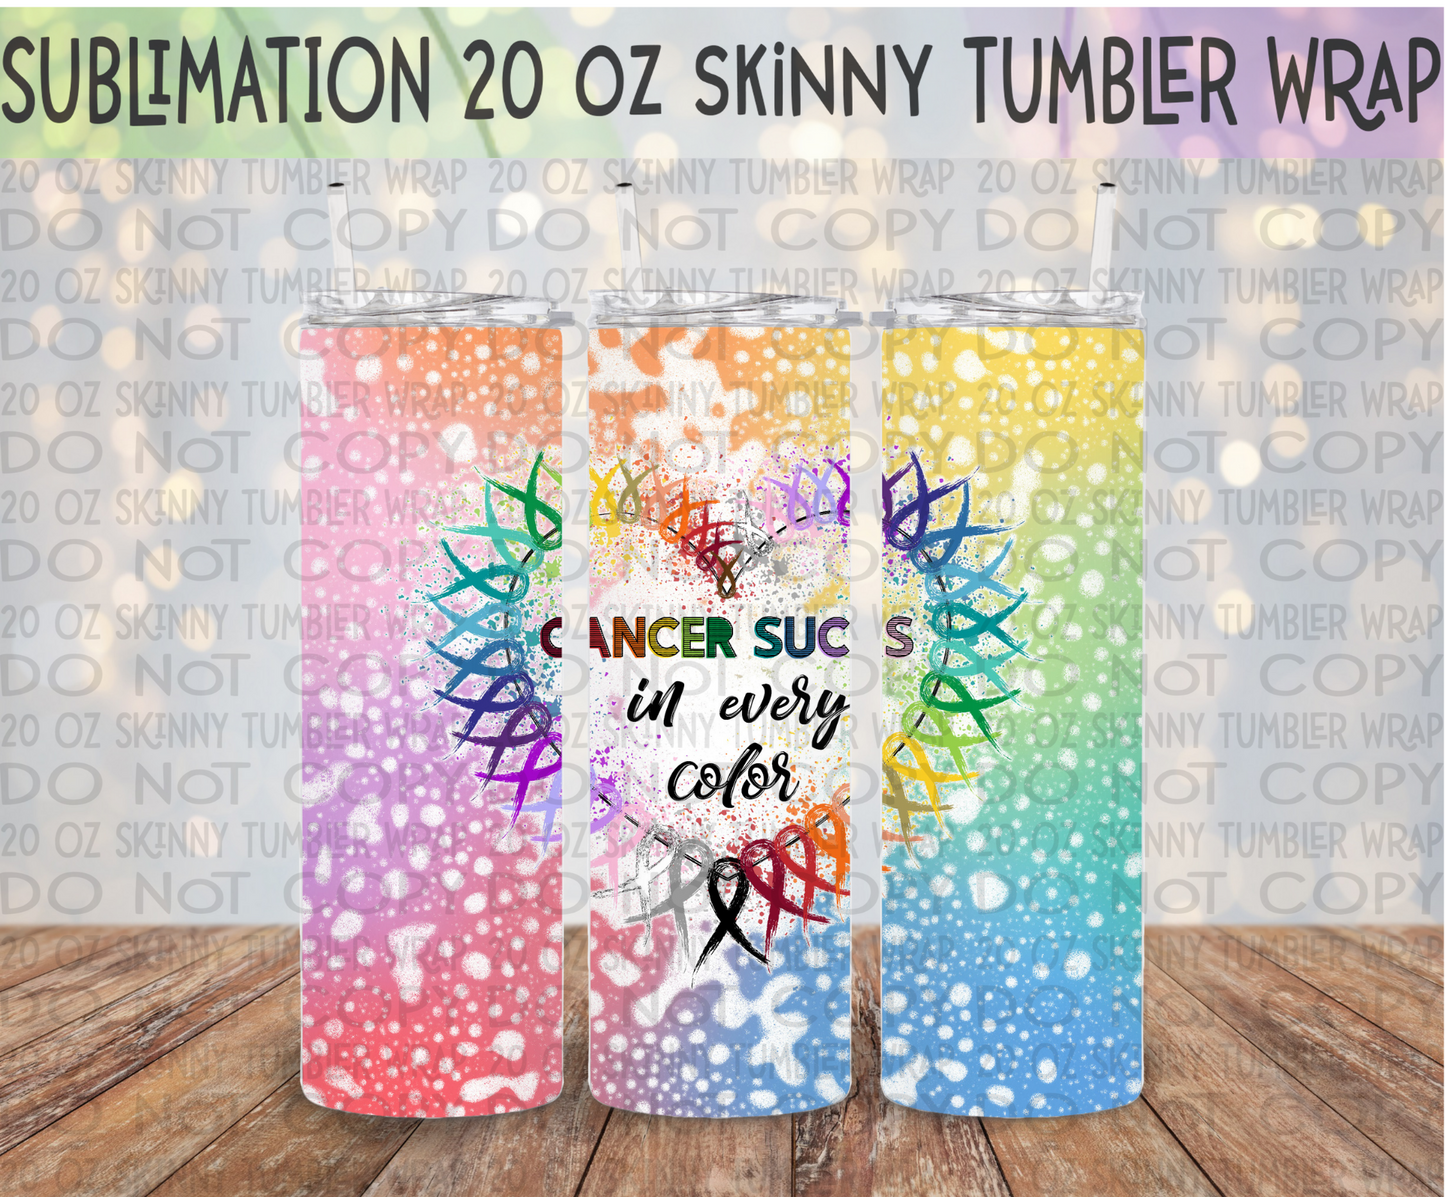 Cancer Sucks in Every Color 20 Oz Skinny Tumbler Wrap - Sublimation Transfer - RTS